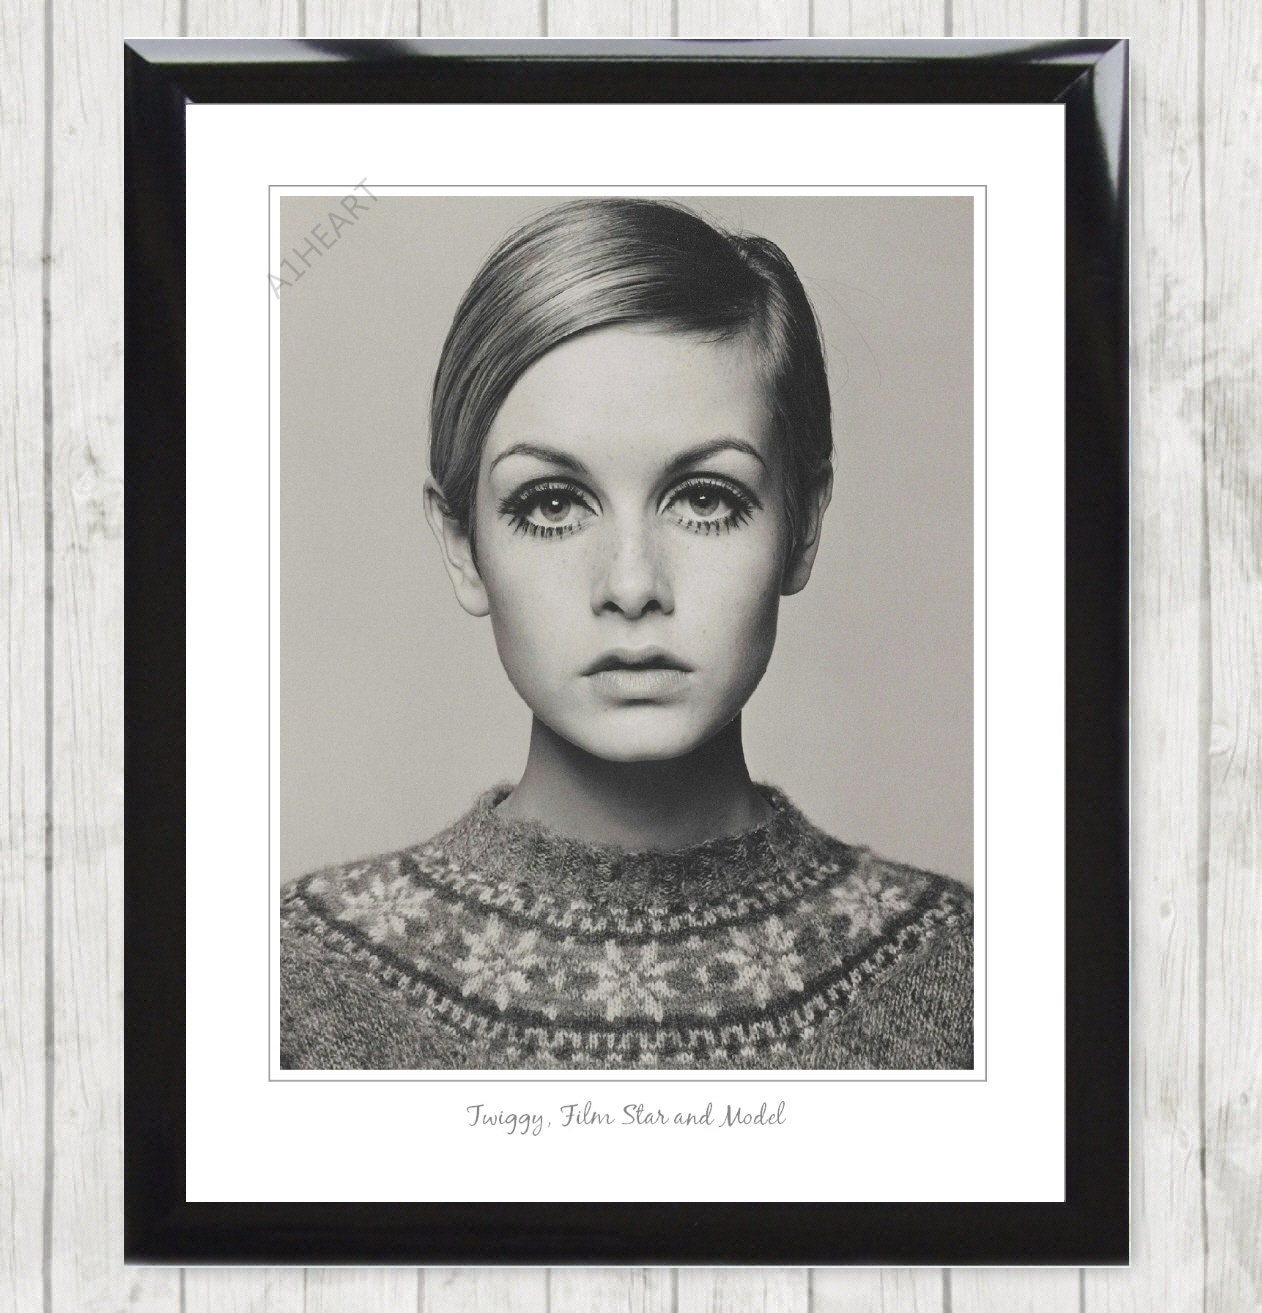 Twiggy, Film Star and Etsy Lawson. and Cultural Actress. Model Print. London. Dame - Art the 60s Poster British Icon 006 in Lesley Swinging